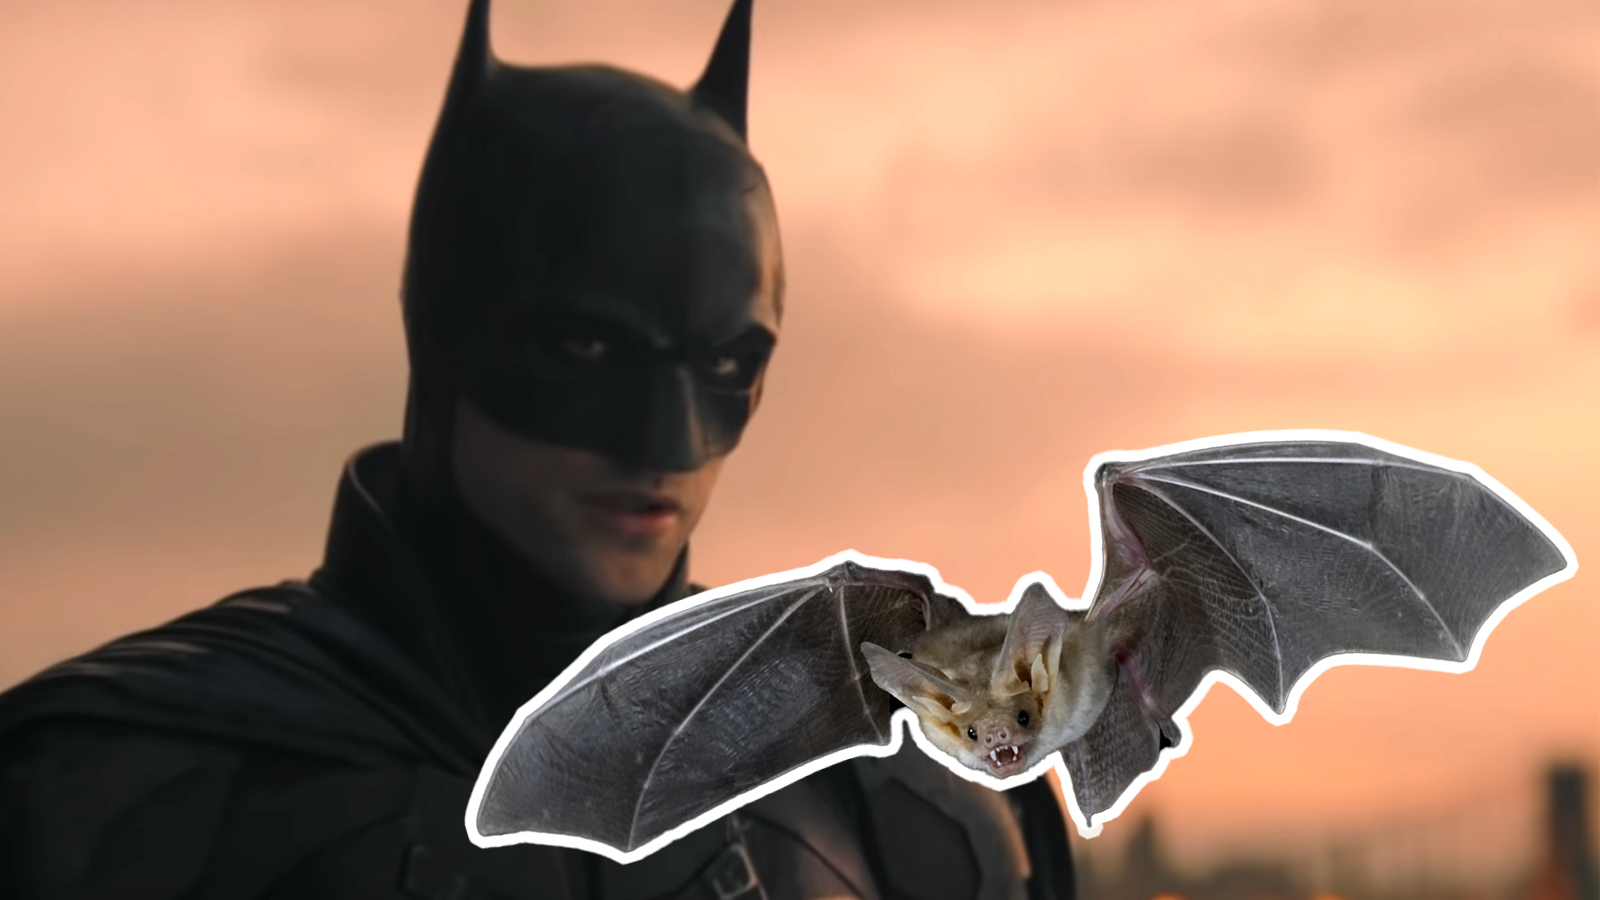 Some ‘Joker’ Just Released A Live Bat During The Batman Screening